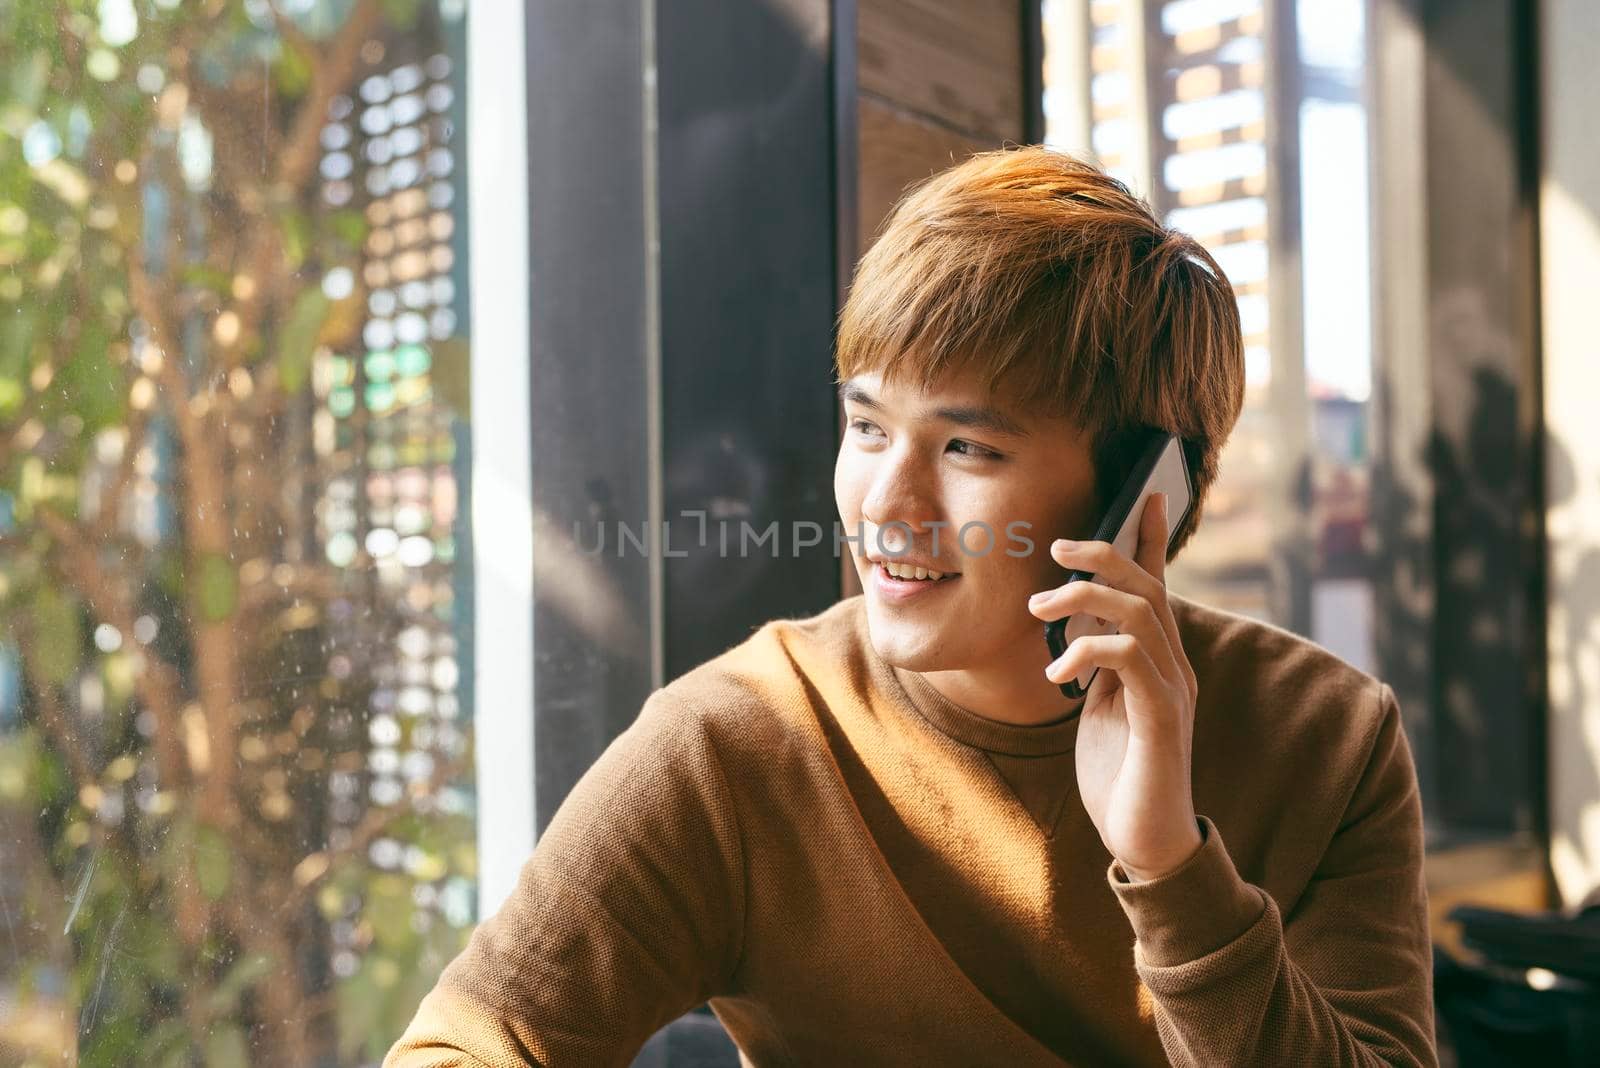 Closeup portrait of smiling young Asian man talking on mobile phone and sitting at empty table with blurred cafe interior in background by makidotvn